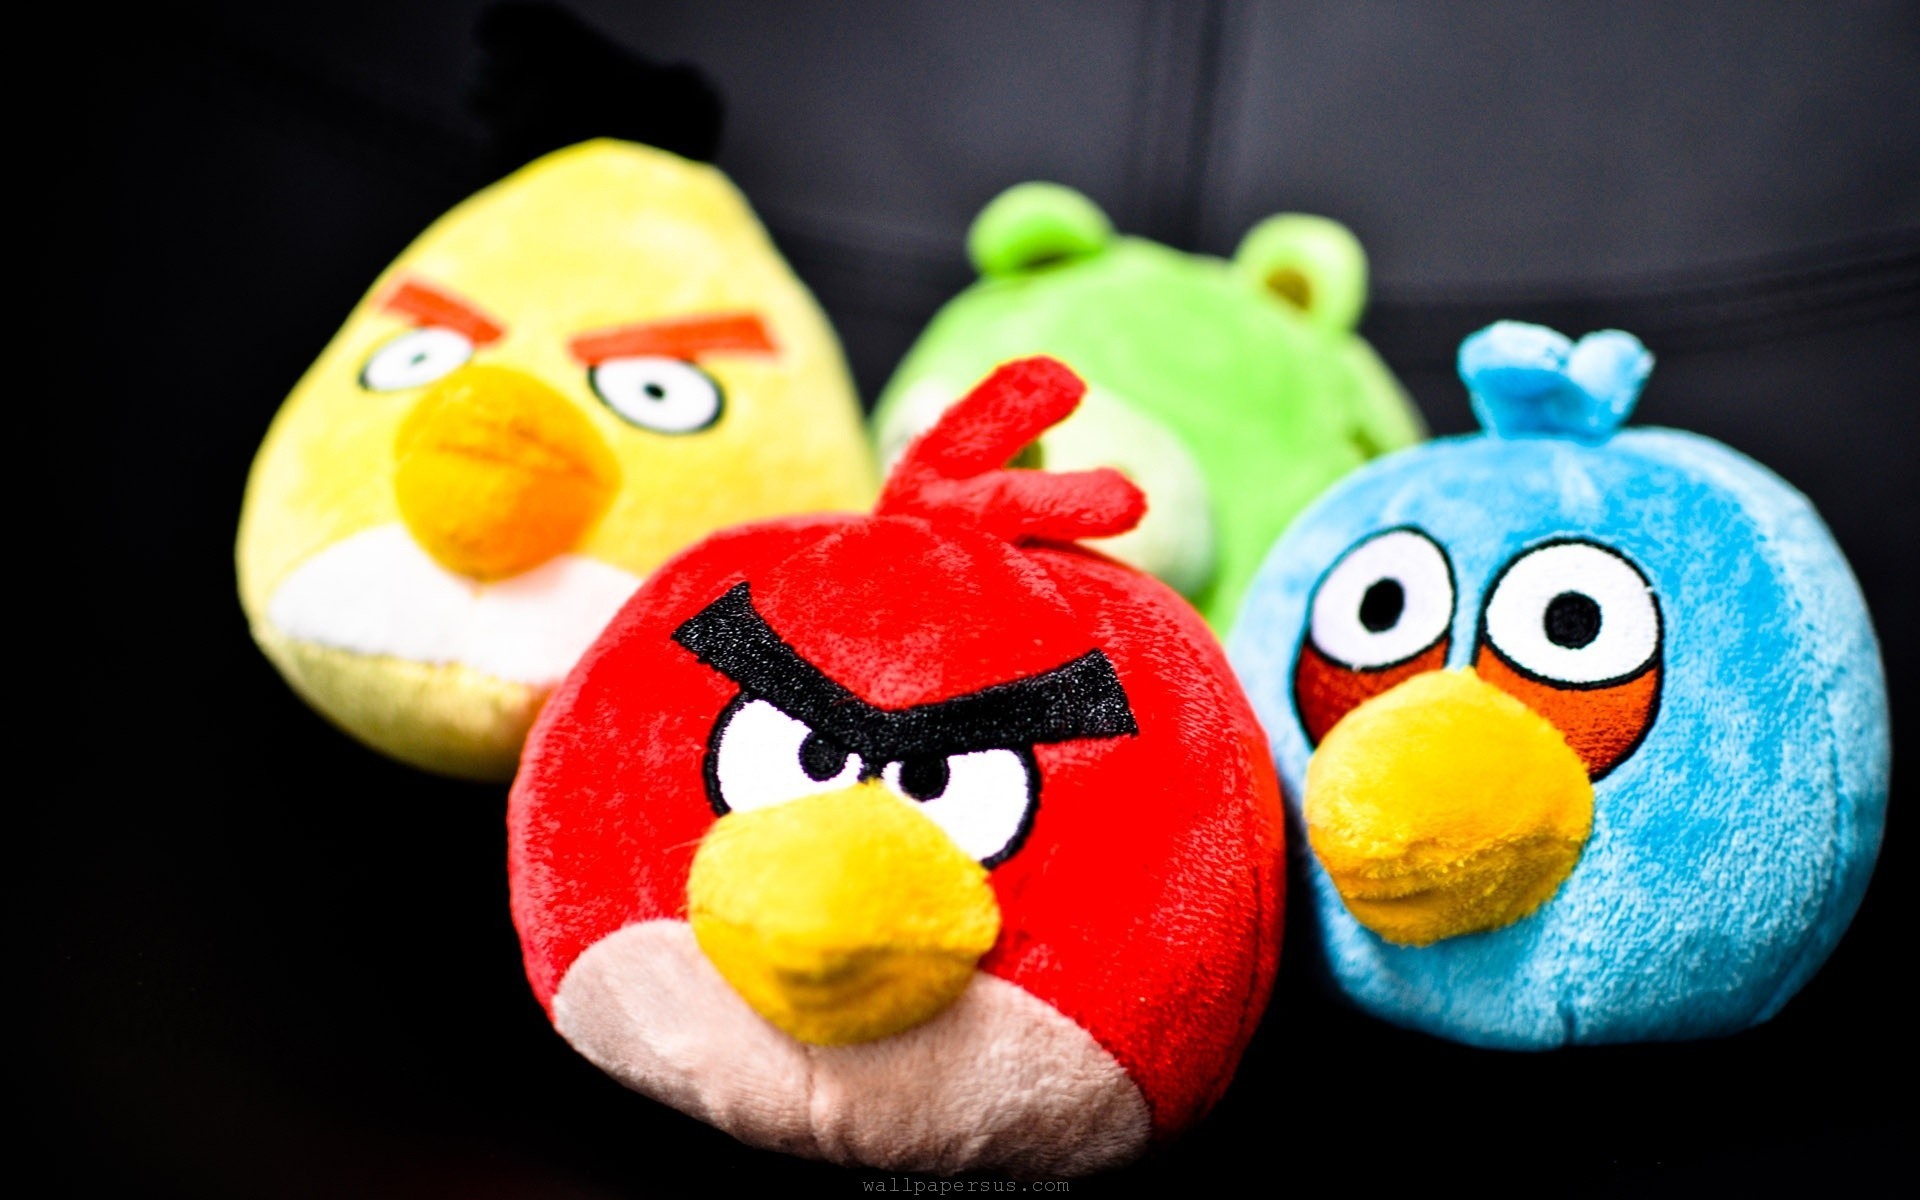 Angry Birds Game Wallpapers #16 - 1920x1200